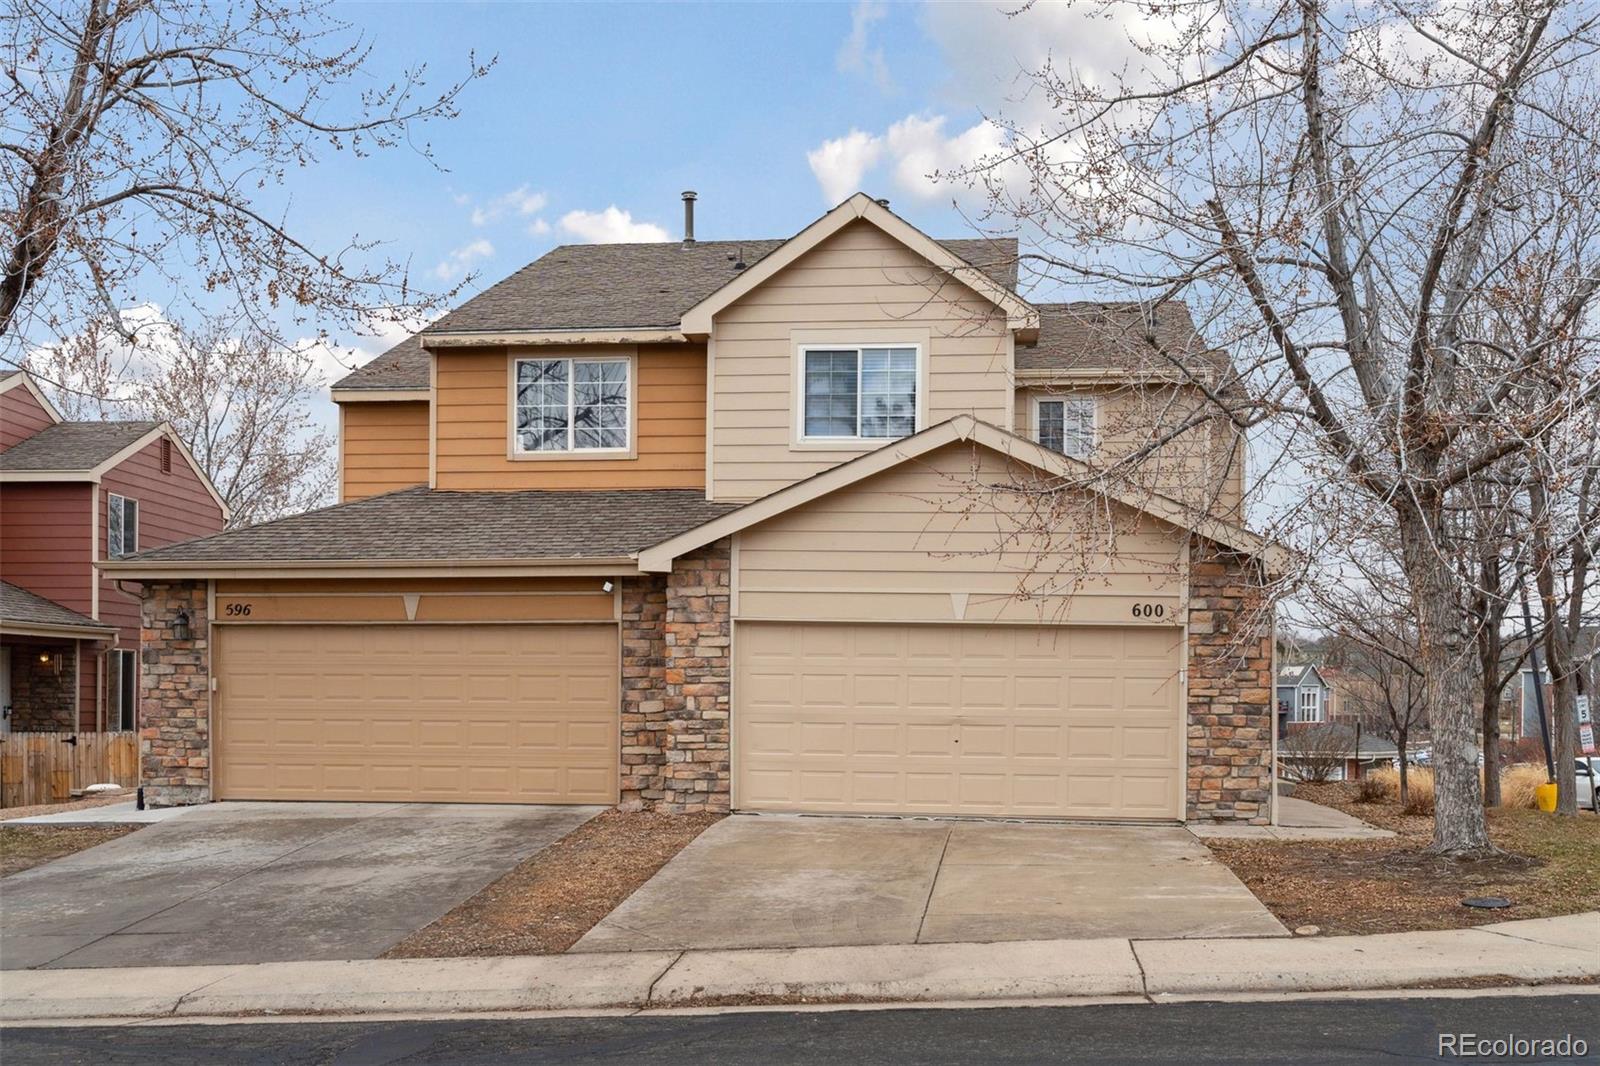 Report Image for 600 W 91st Circle,Thornton, Colorado